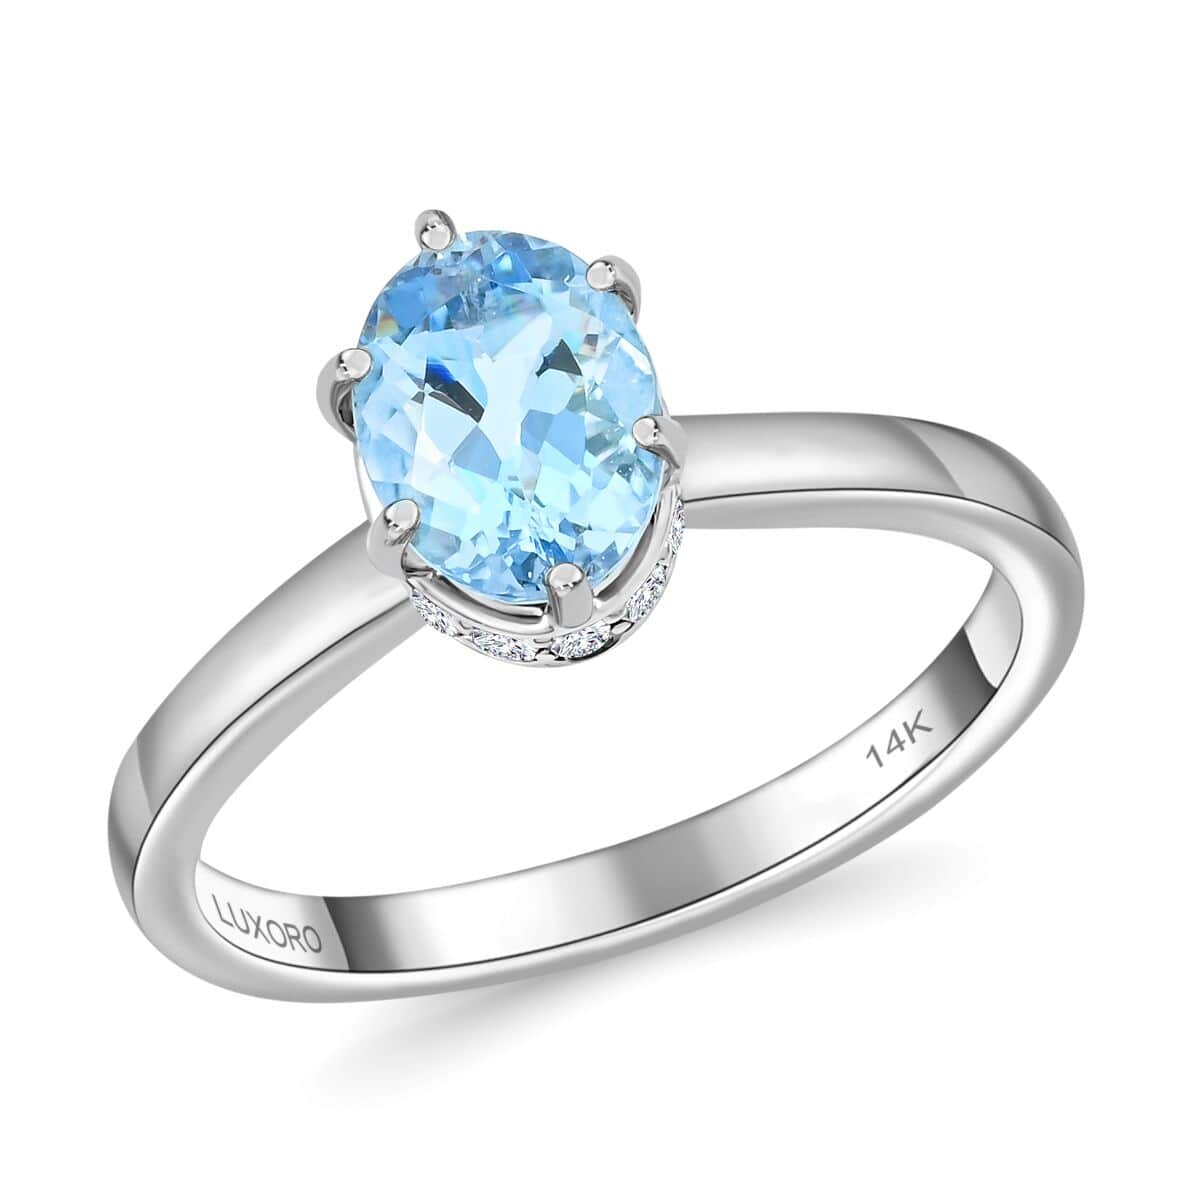 Certified & Appraised Luxoro 14K White Gold AAA Santa Maria Aquamarine and I2 Diamond Ring (Size 7.0) 1.25 ctw image number 0